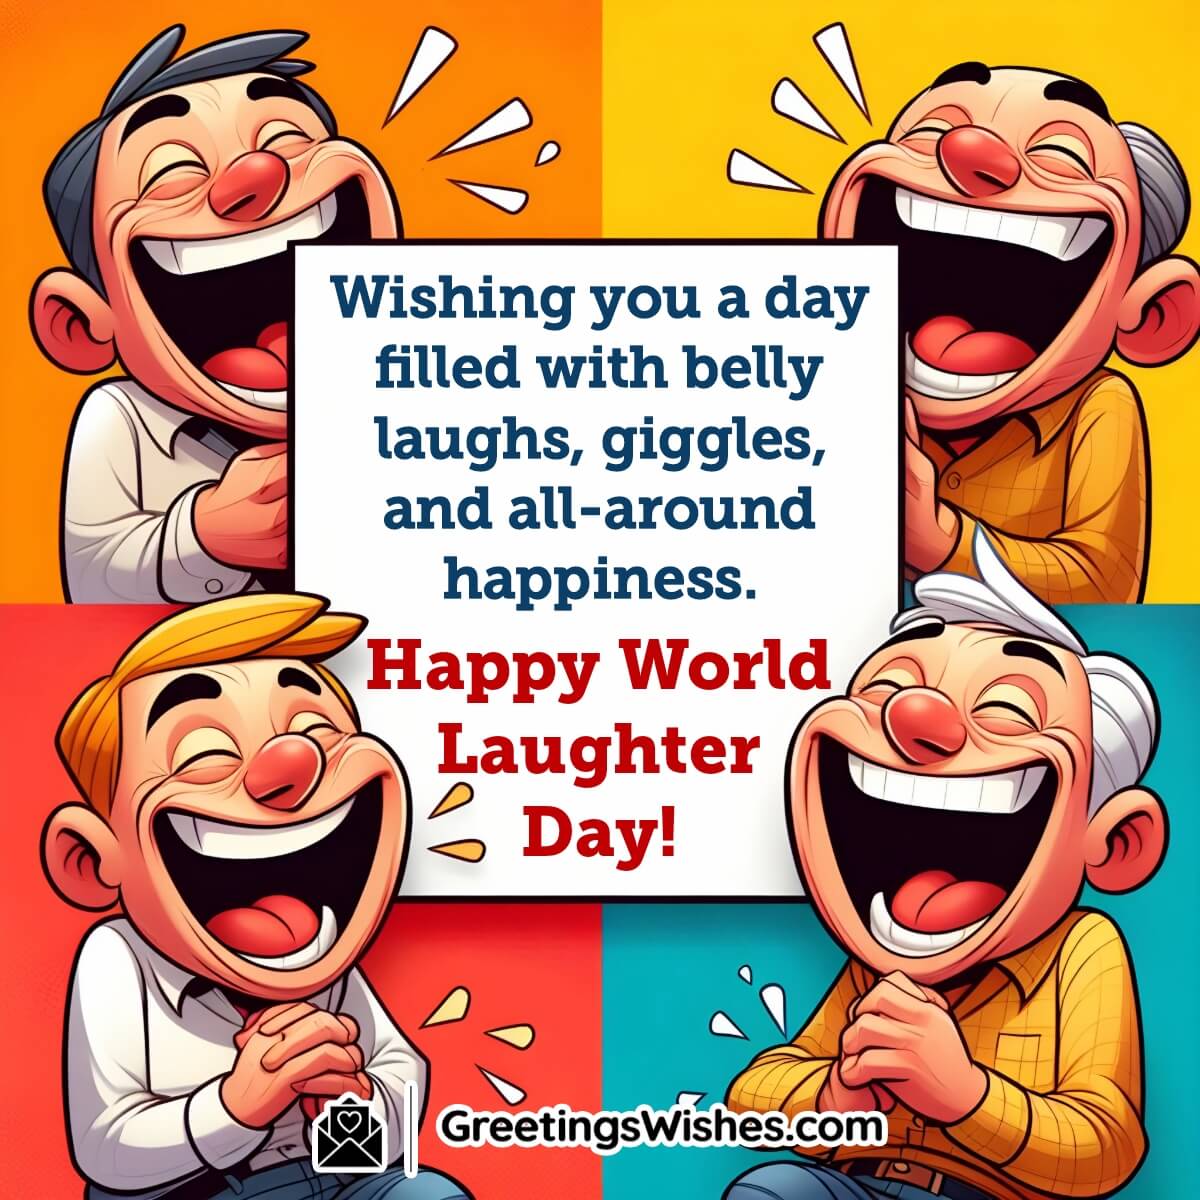 Happy World Laughter Day Wishes